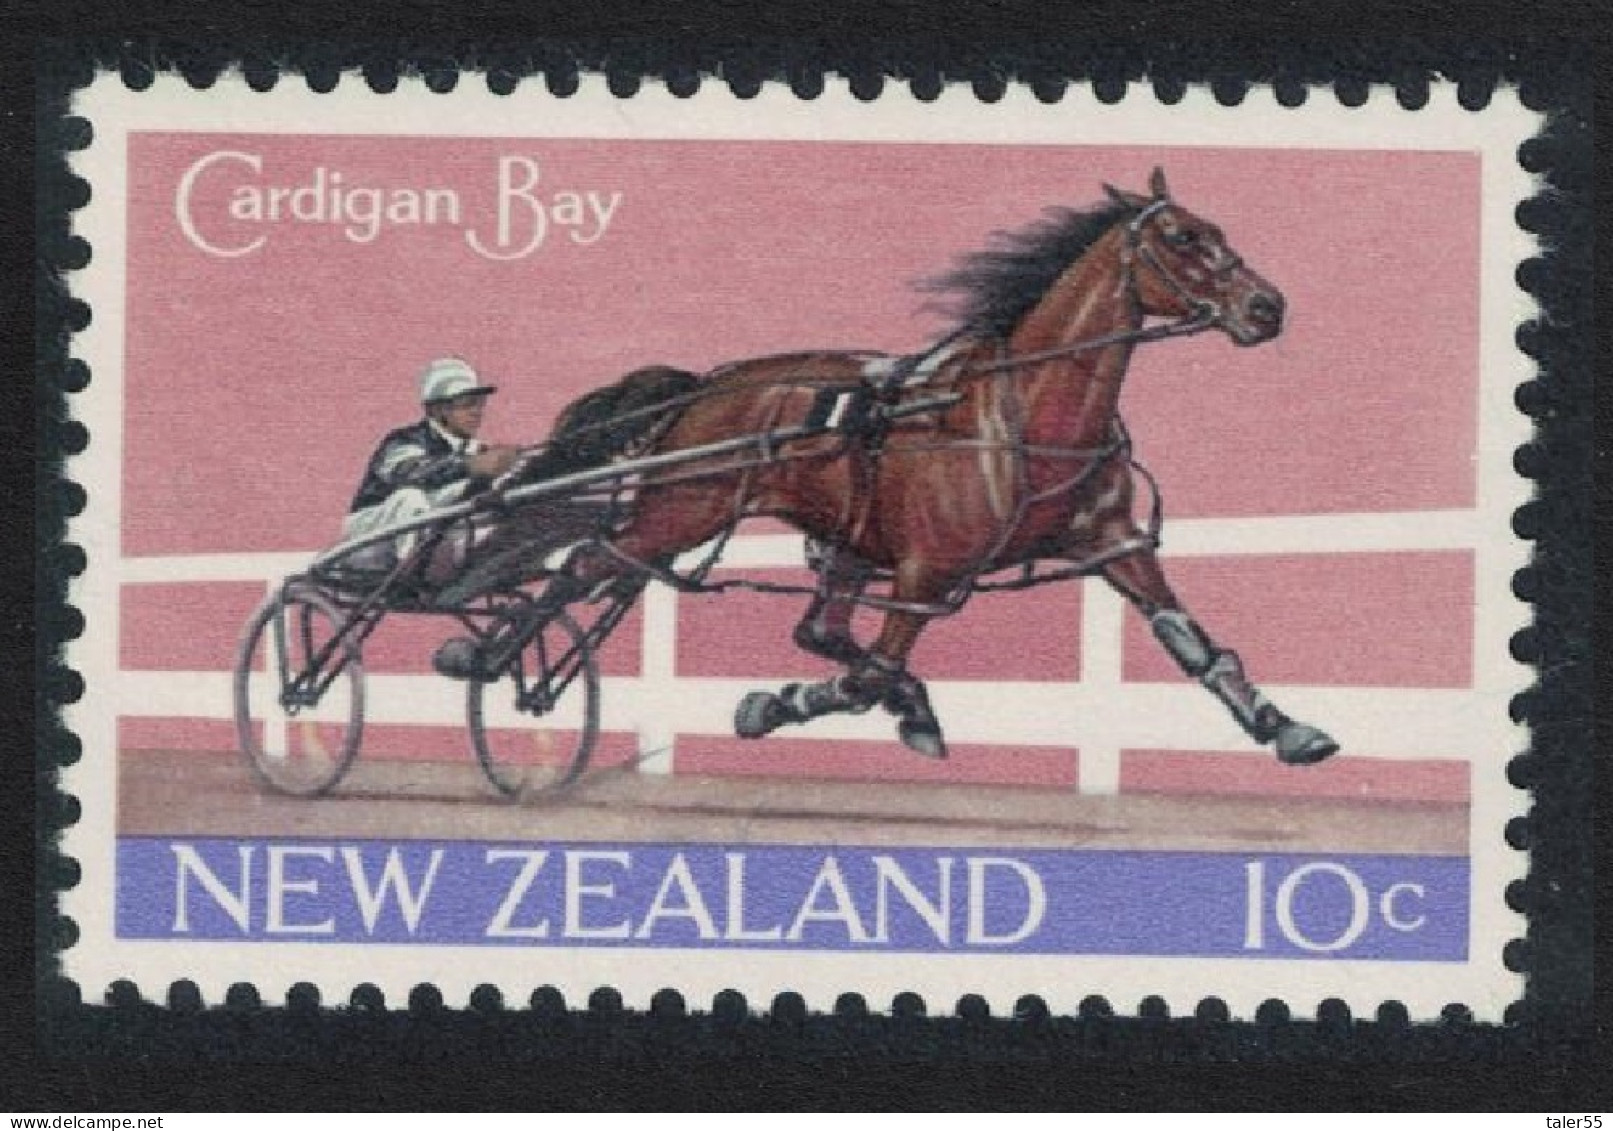 New Zealand Horse Return Of Cardigan Bay To New Zealand 1970 MNH SG#913 - Unused Stamps